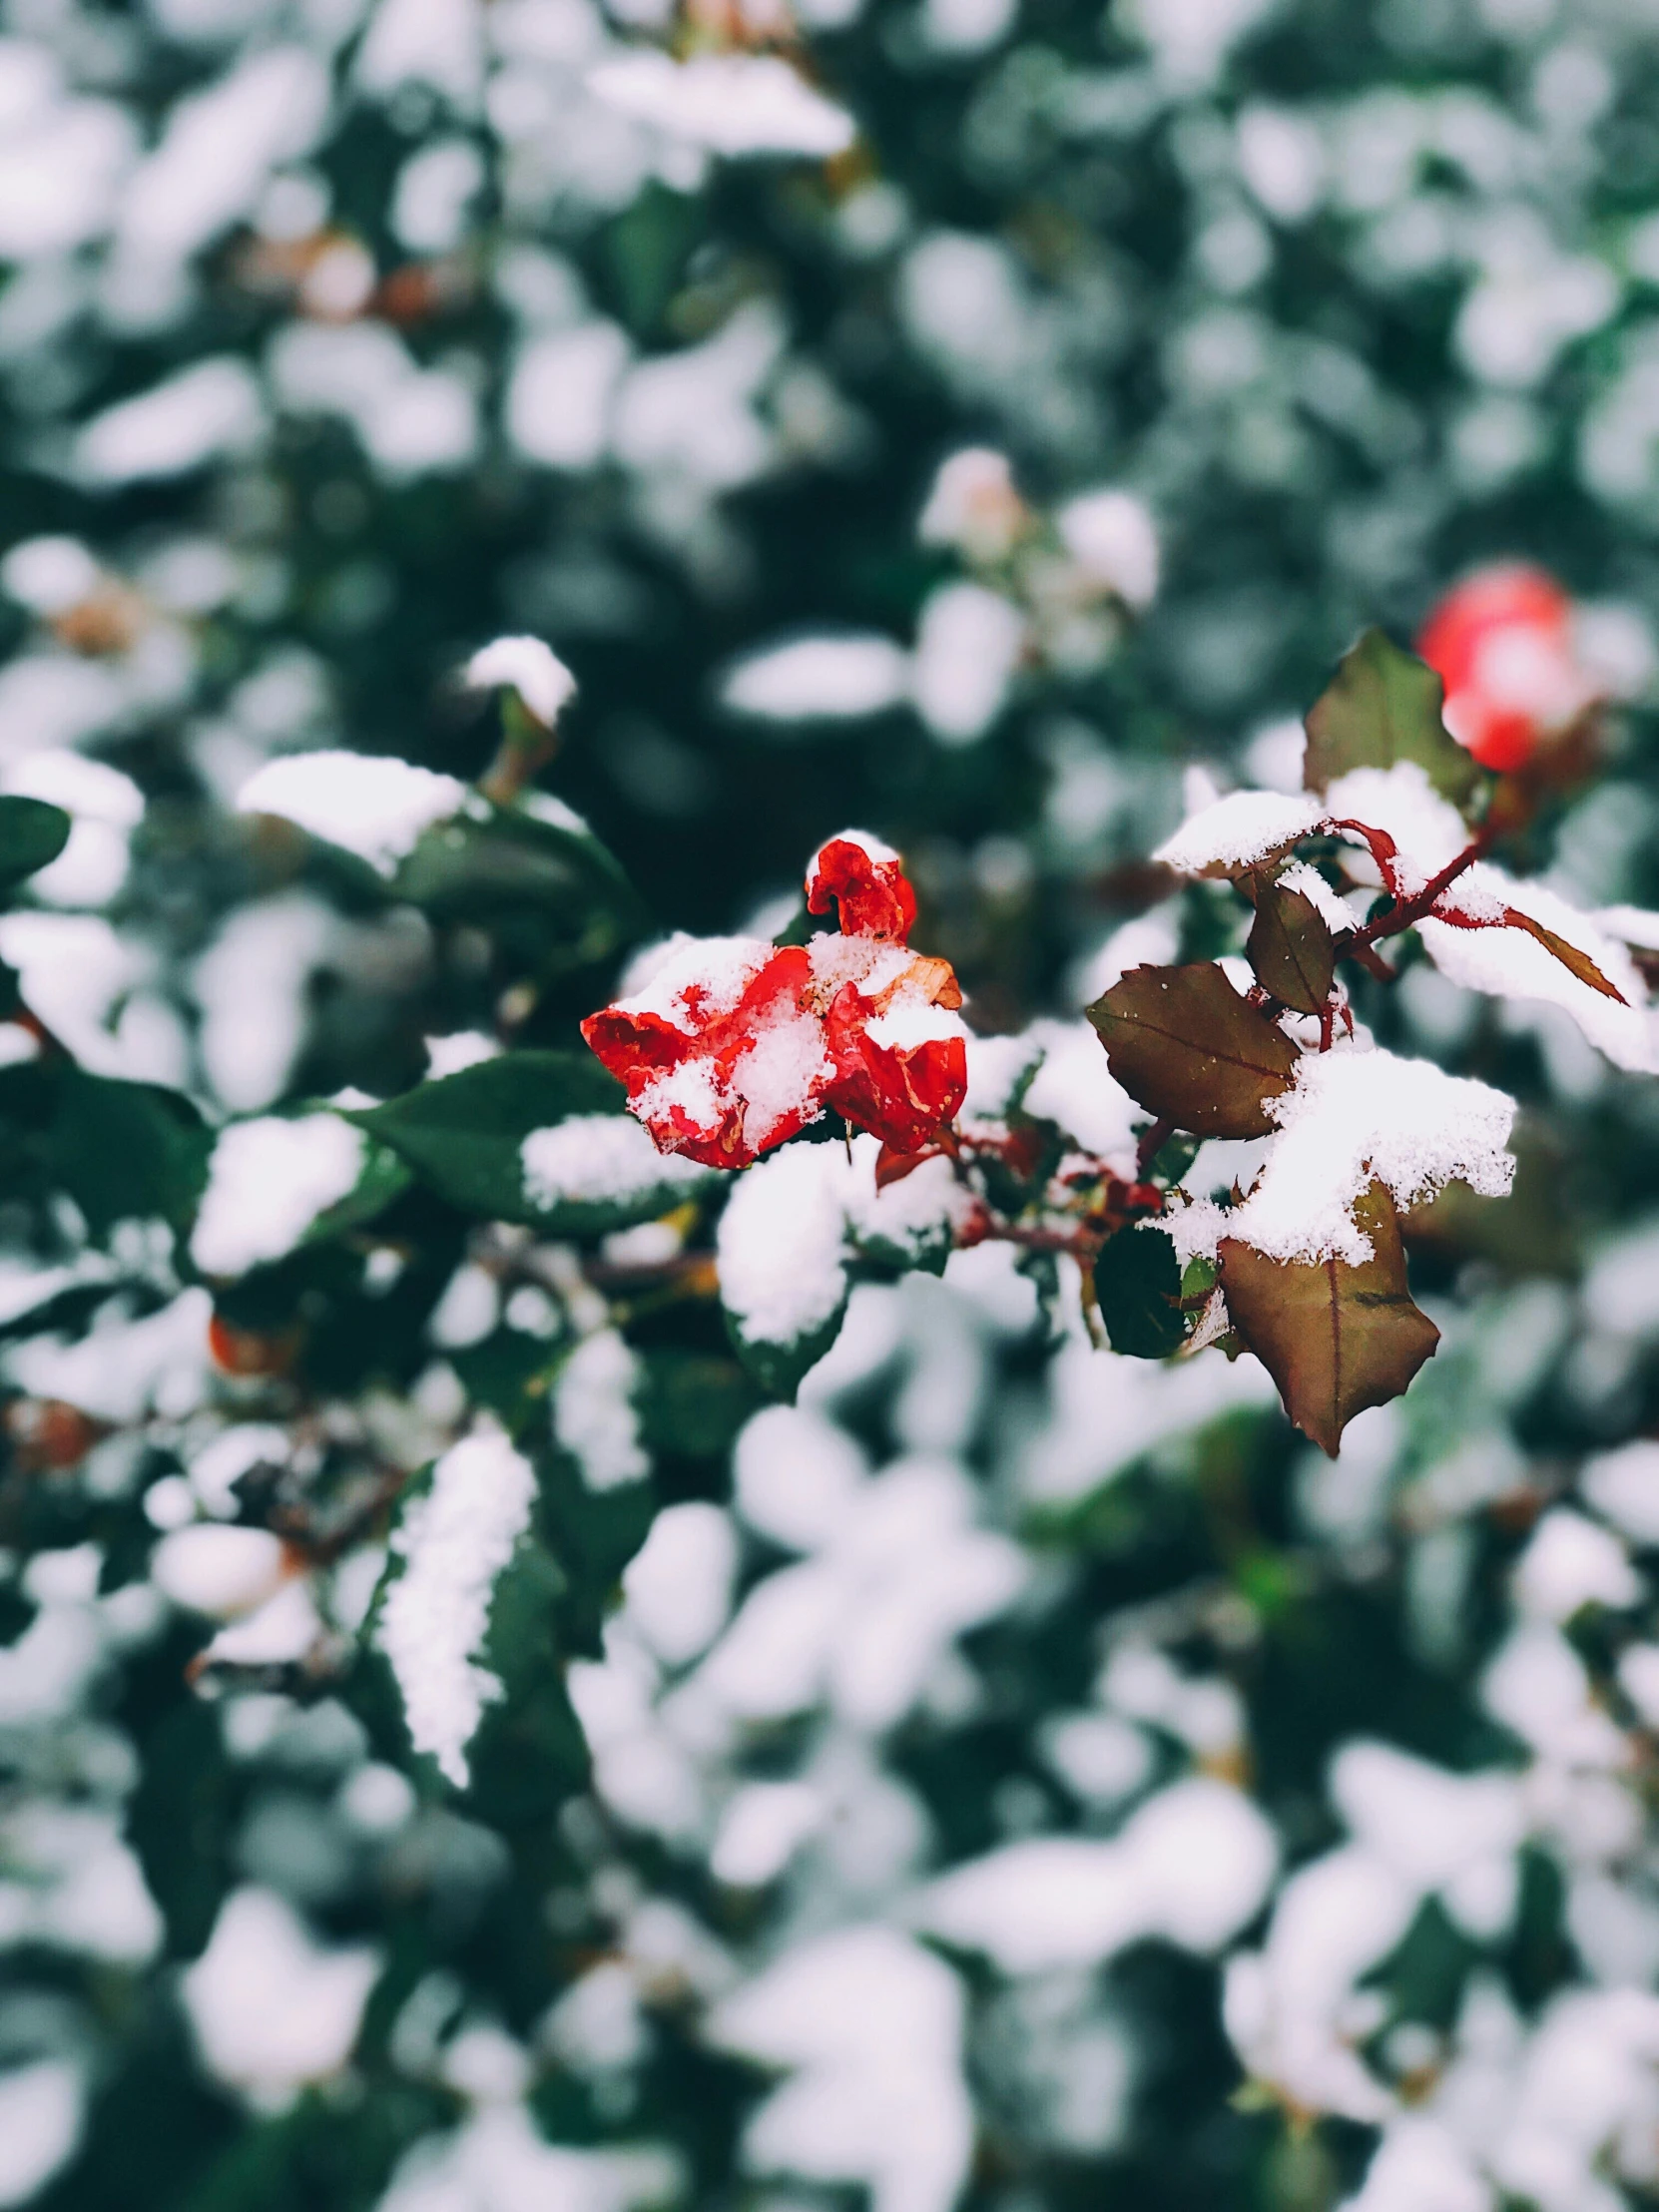 red berries are sprinkled in snow, and surrounded by green leaves